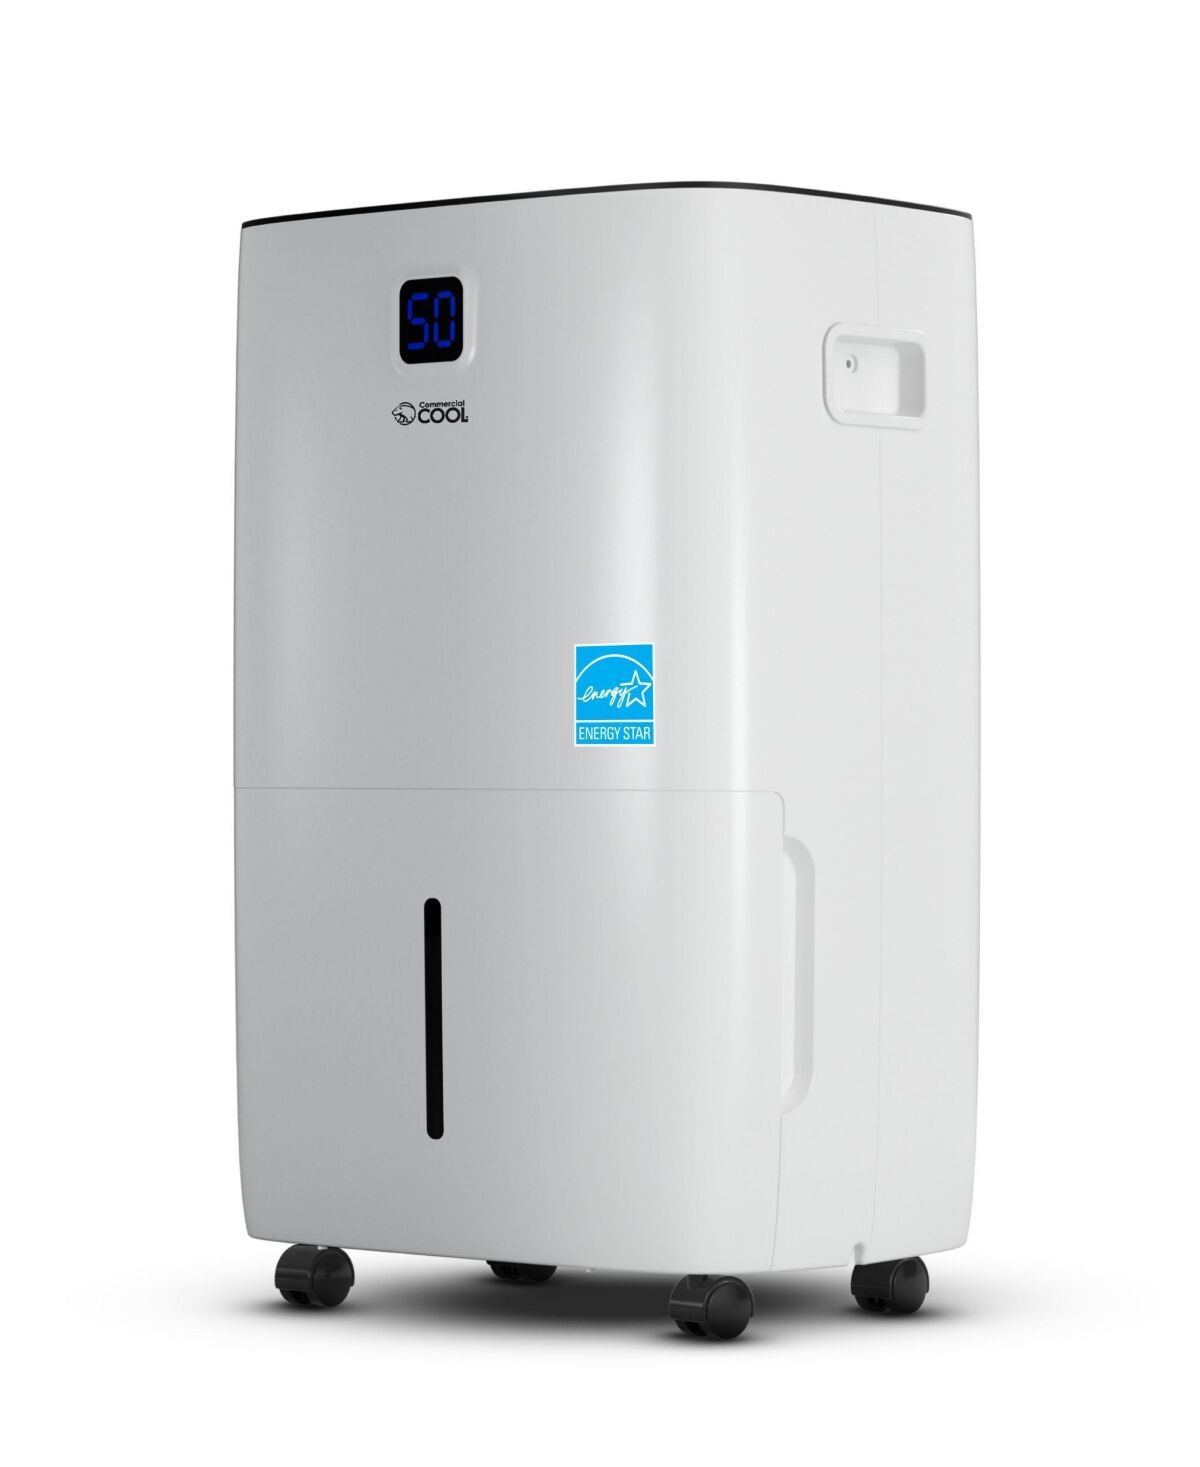 Commercial Cool Dehumidifier, 50 Pint Dehumidifier,Portable Dehumidifier with Continuous Drainage 4500 Sq. Ft. - White